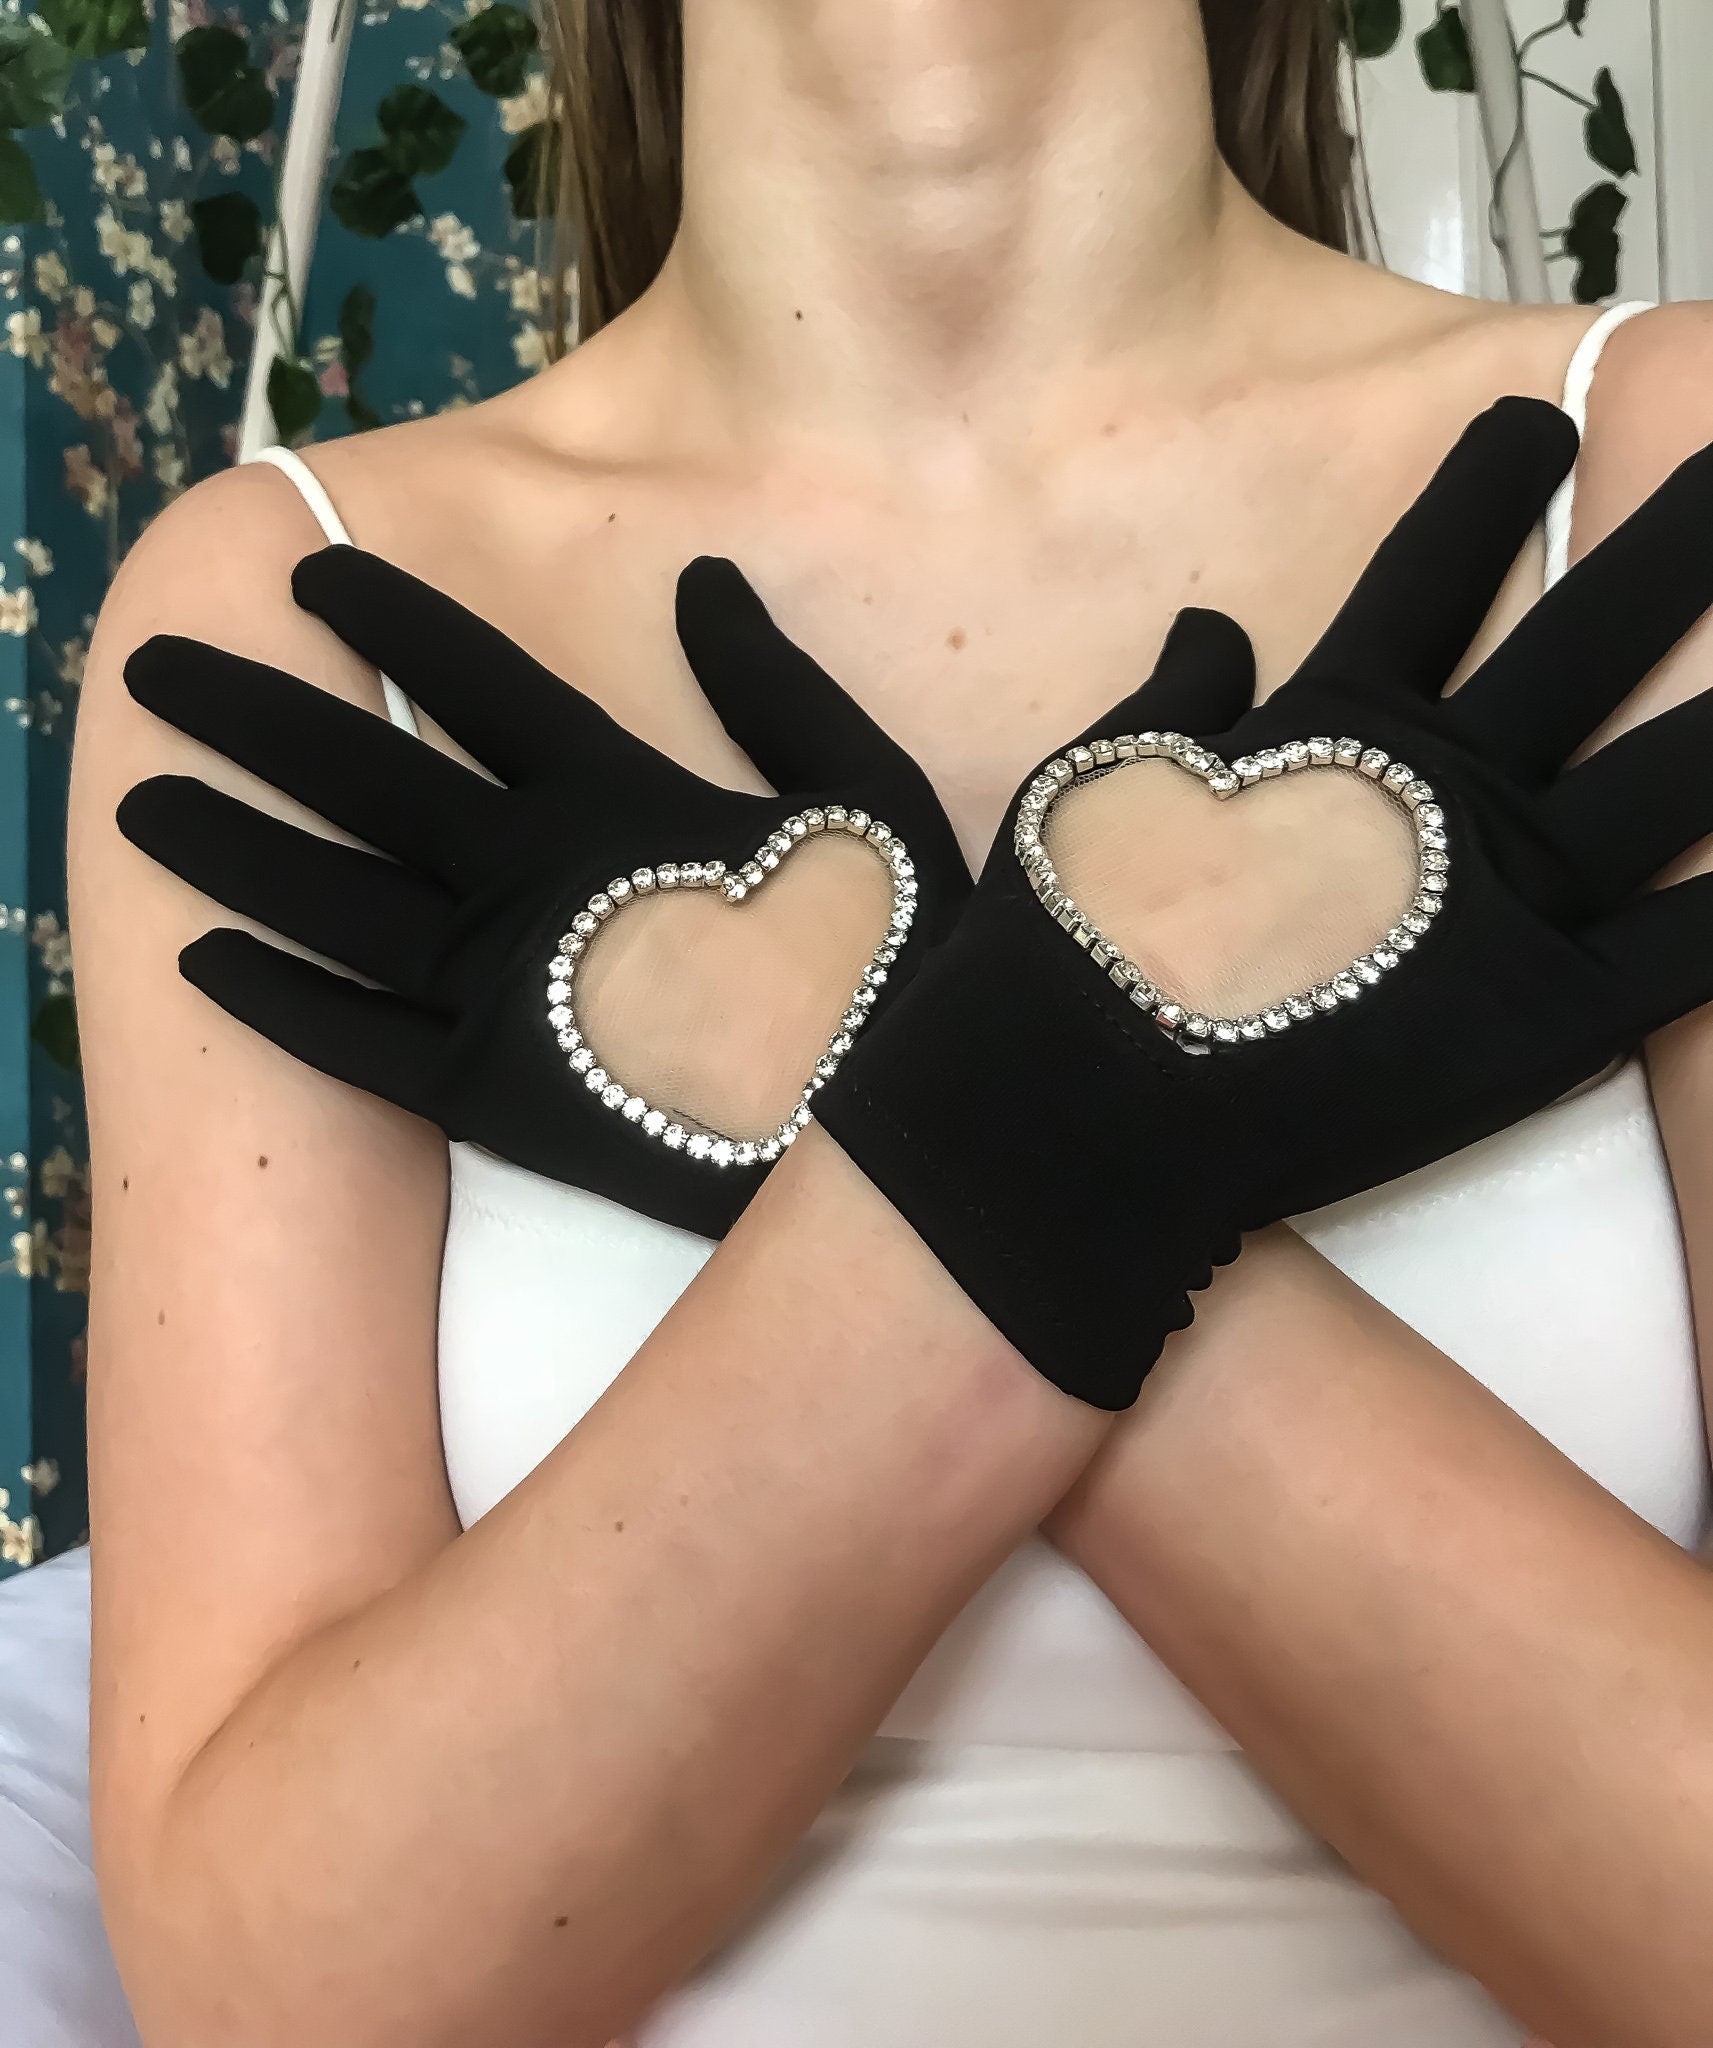 Ace of Hearts Gloves